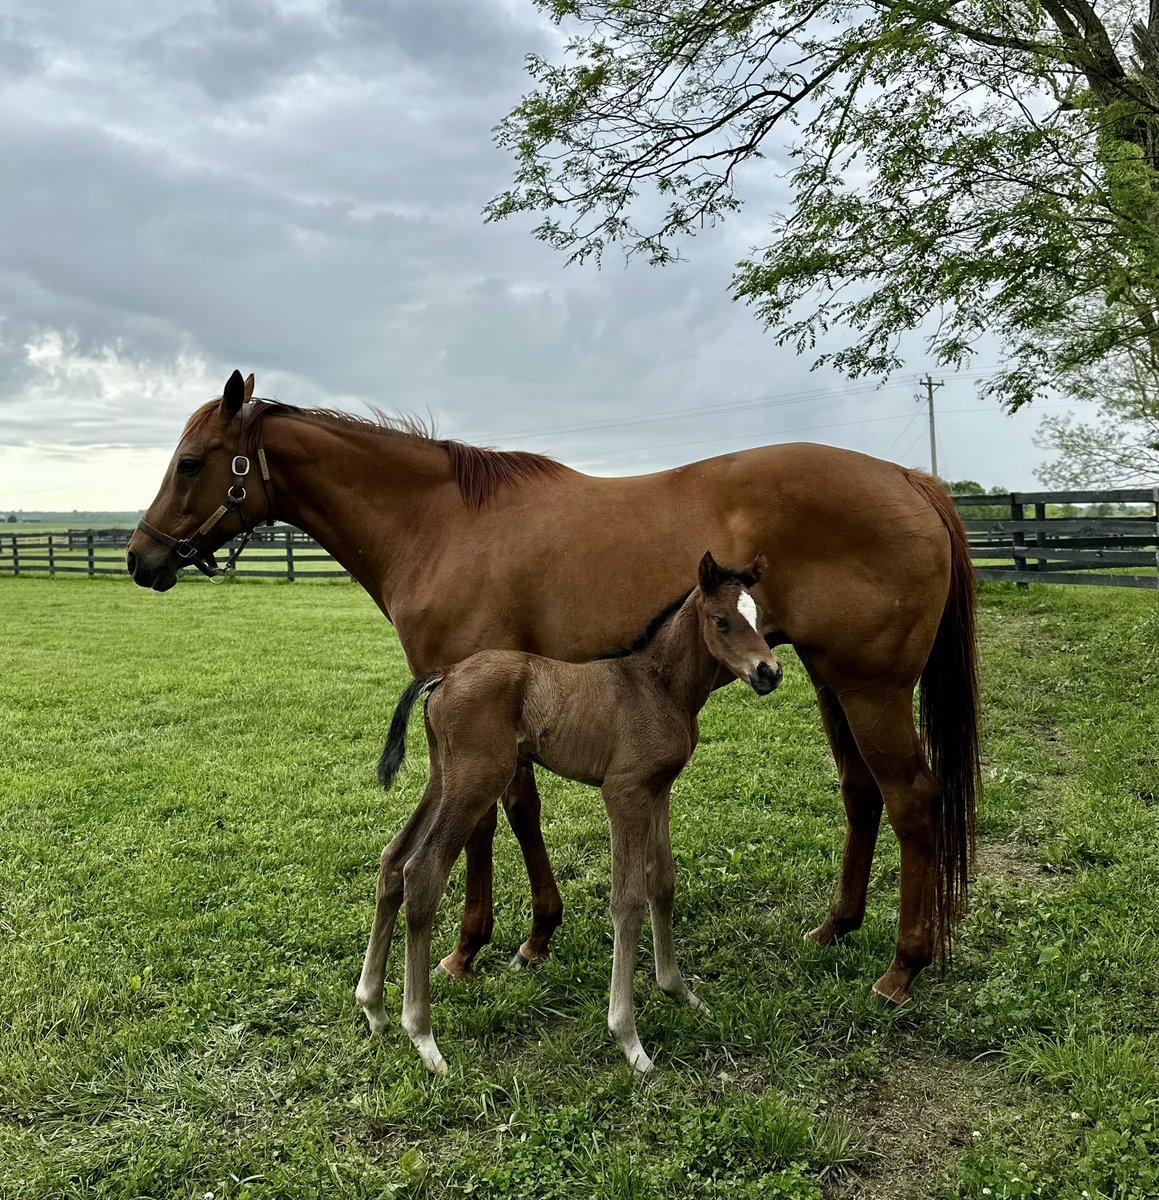 Another beautiful, leggy foal by our @breederscup Champion, Aloha West 🌺Breeders are loving their foals and keep booking mares back @millridgefarm #BelieveBig